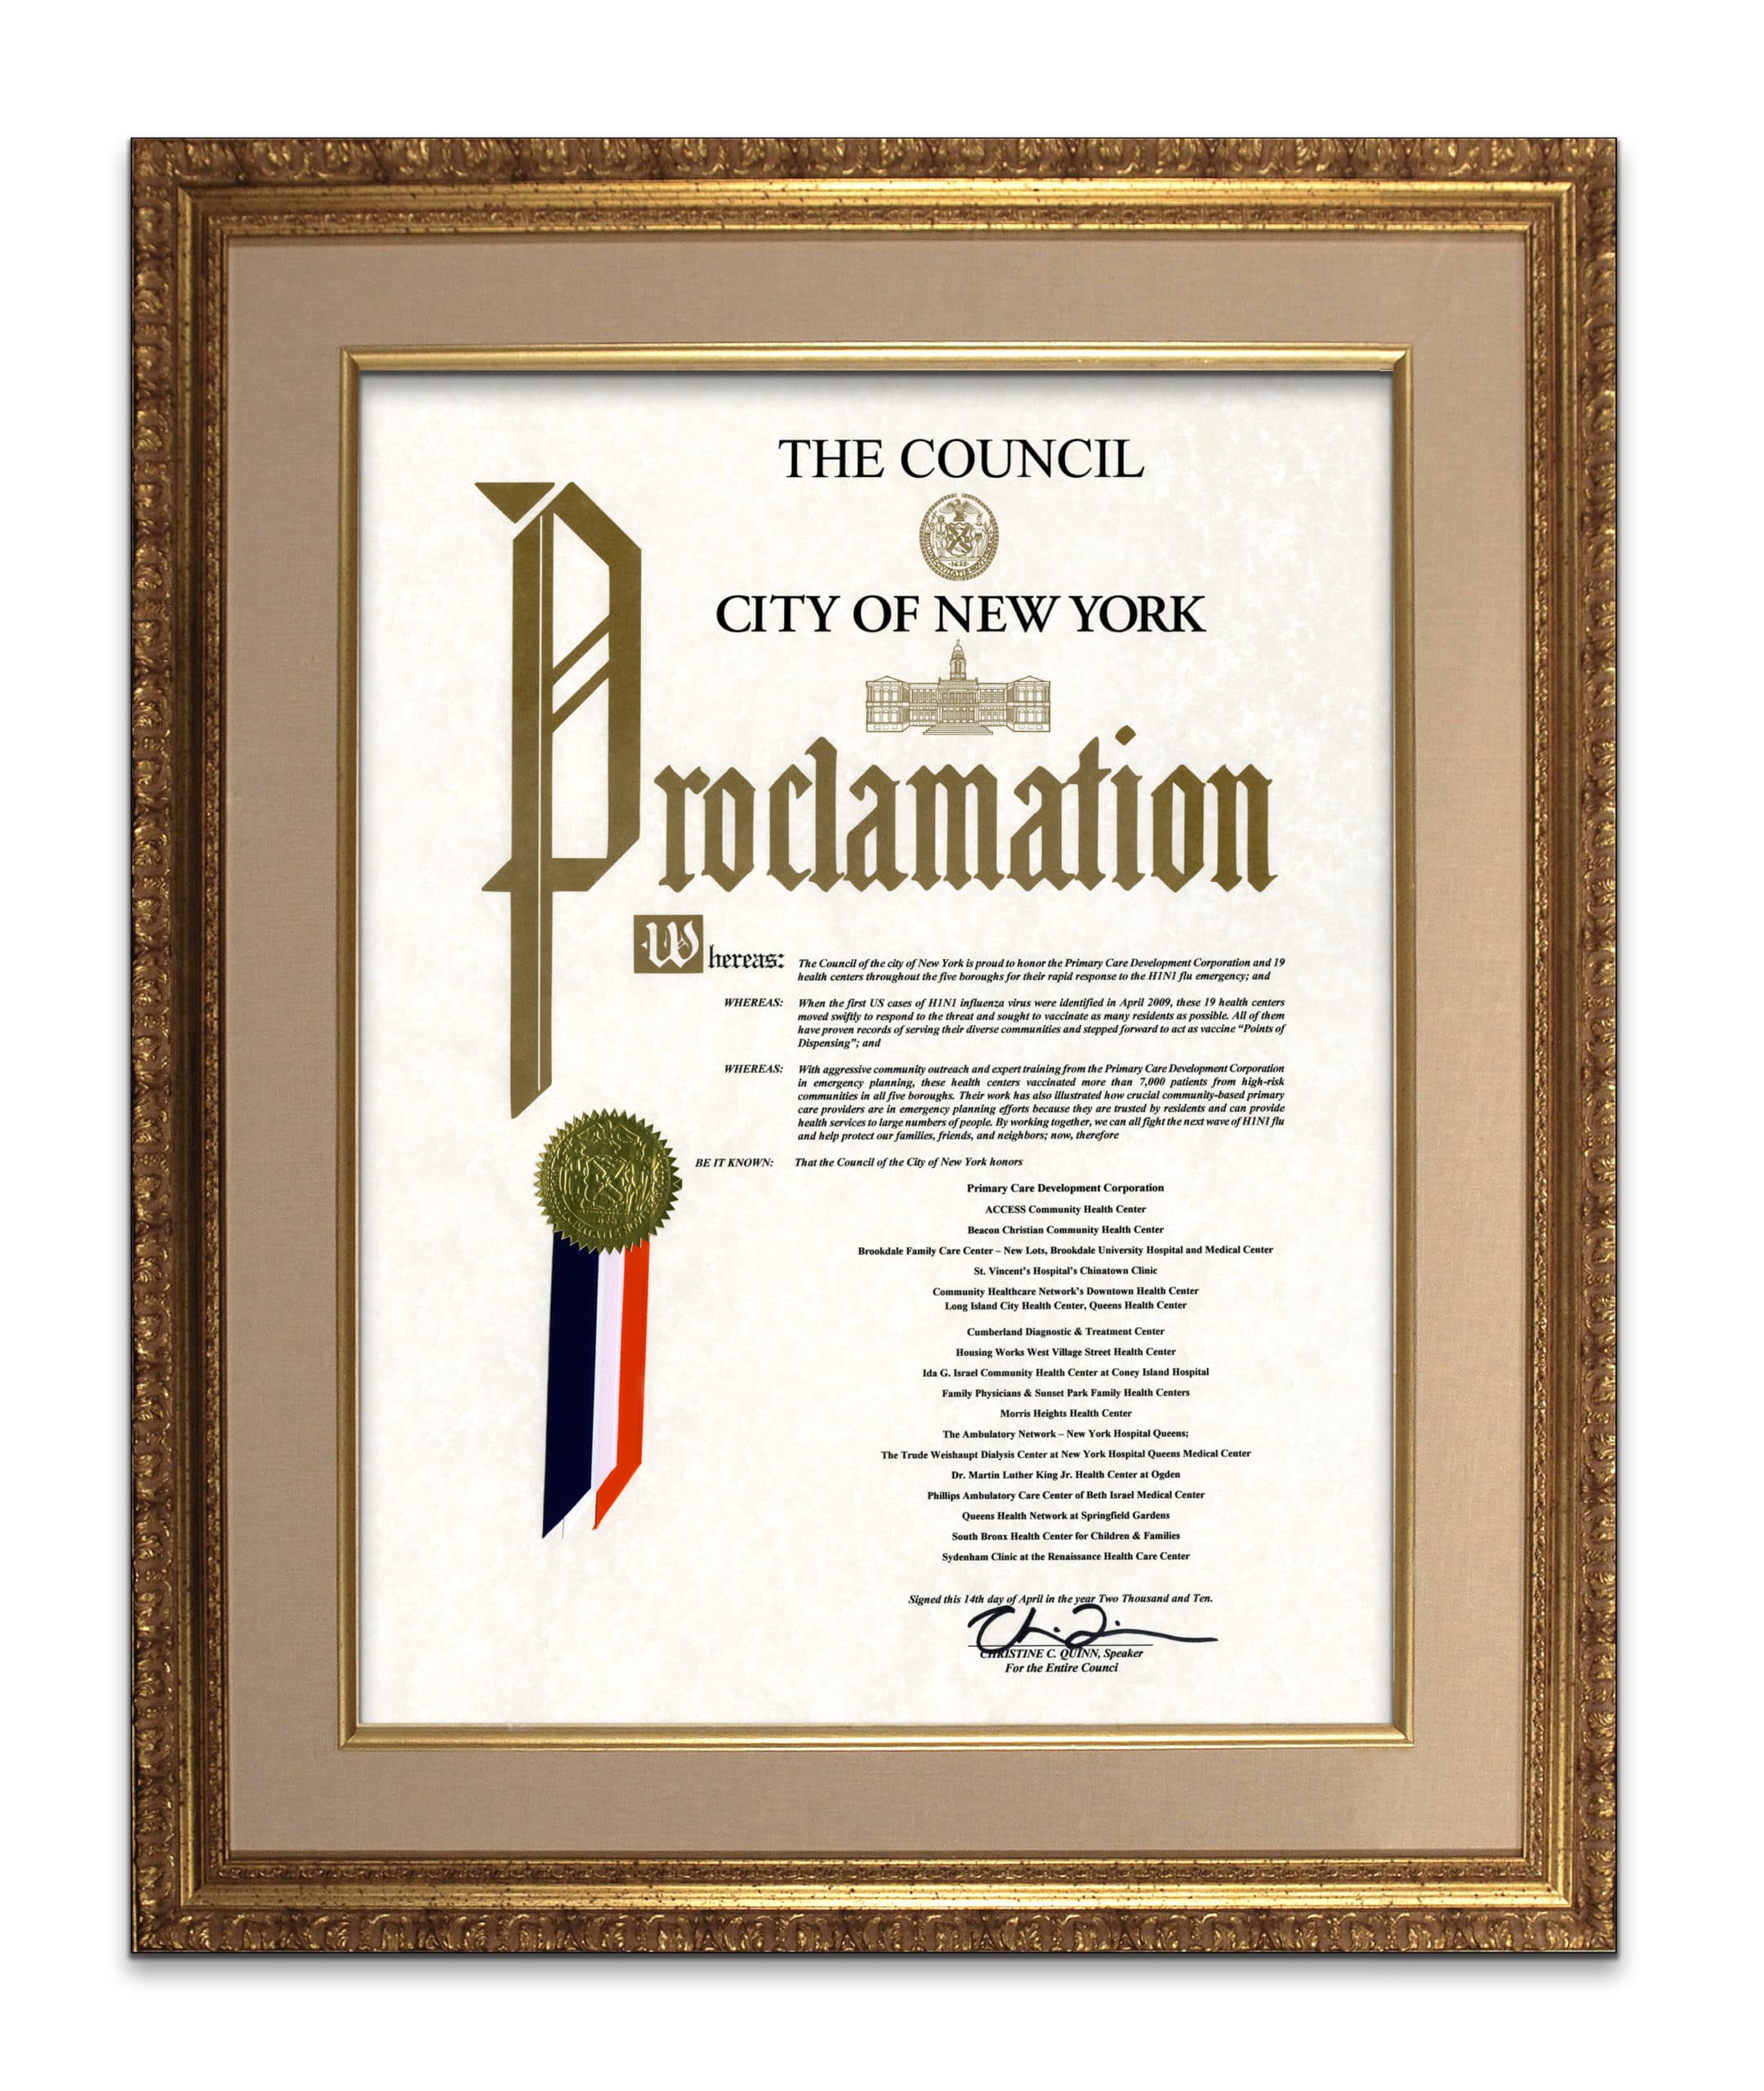 The Council City of New York proclamation